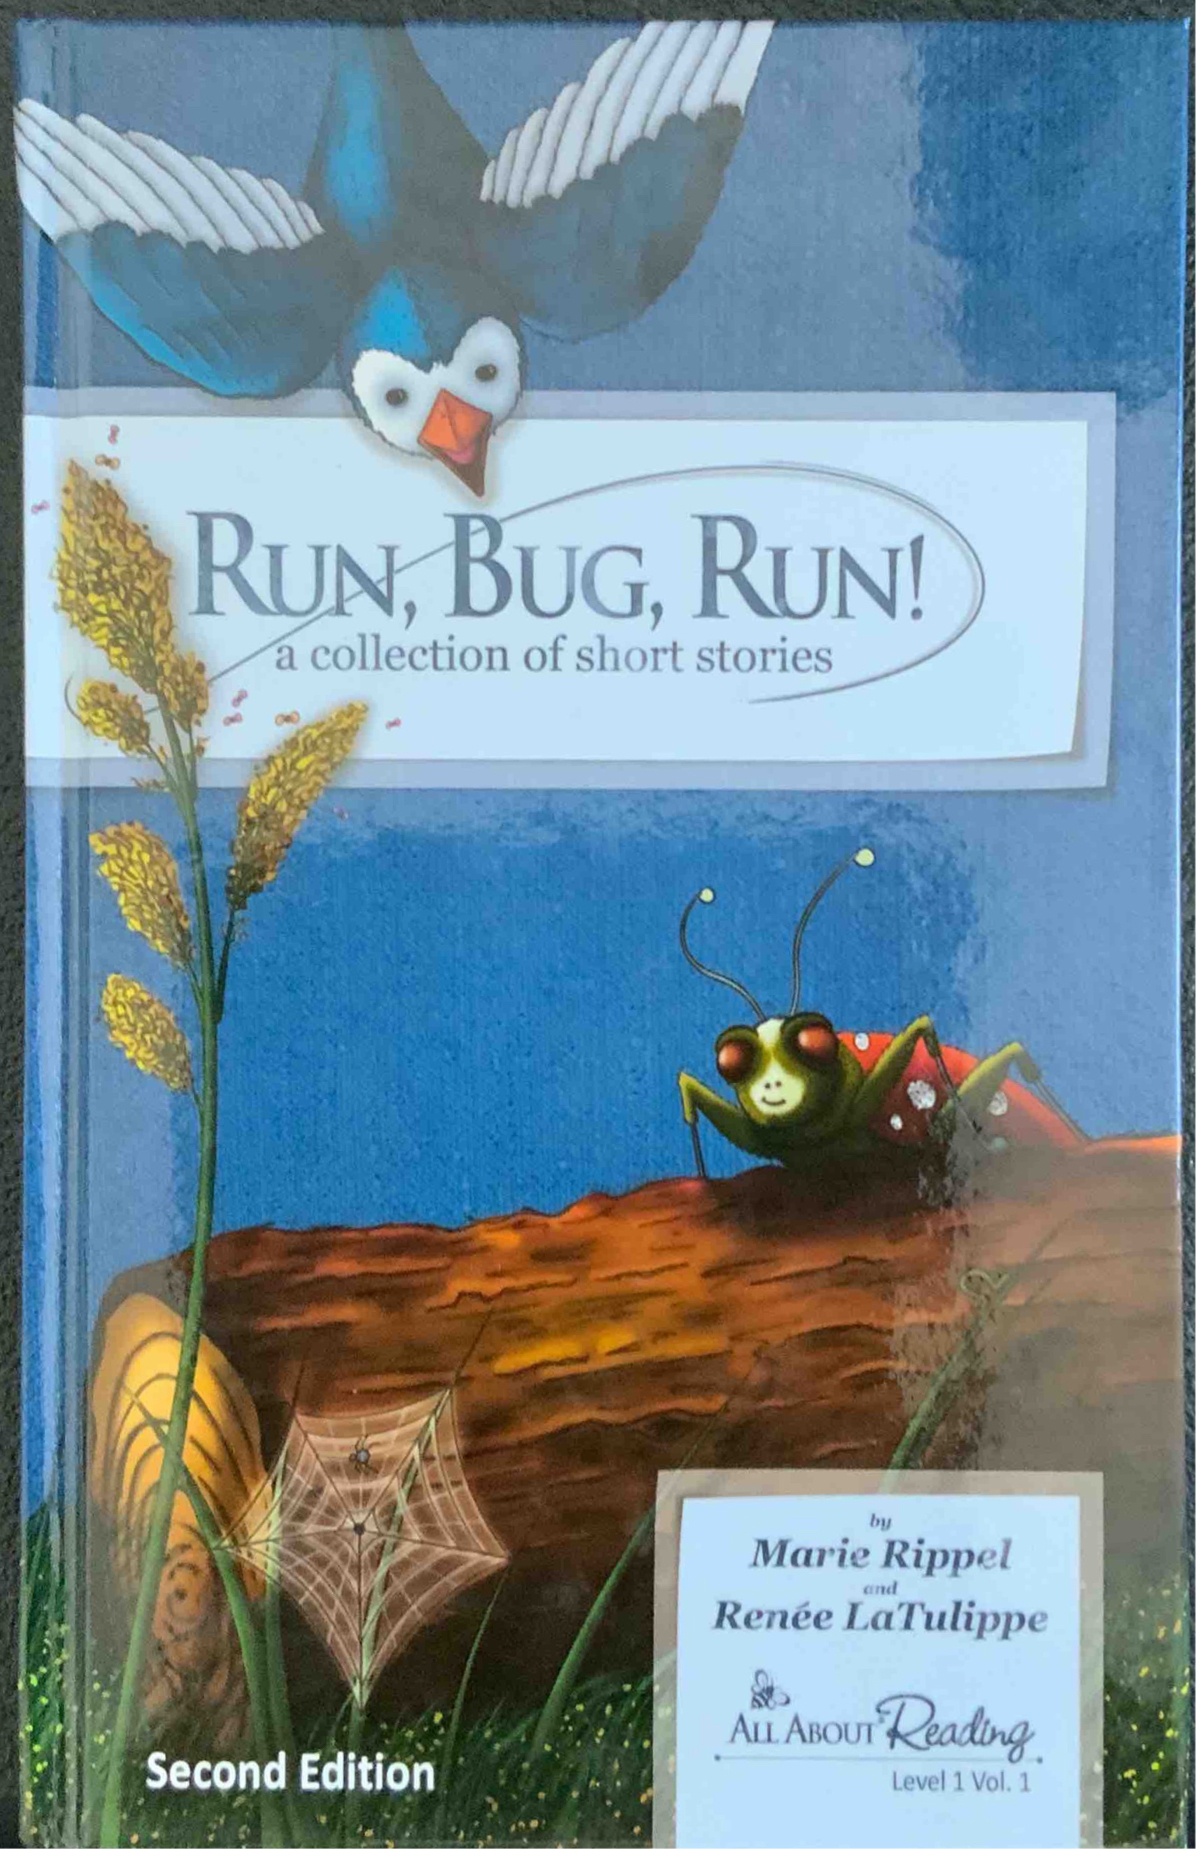 All About Reading- Run, Bug, Run!: Level1 Vol.1-  A Collection of Short Stories- Second Edition